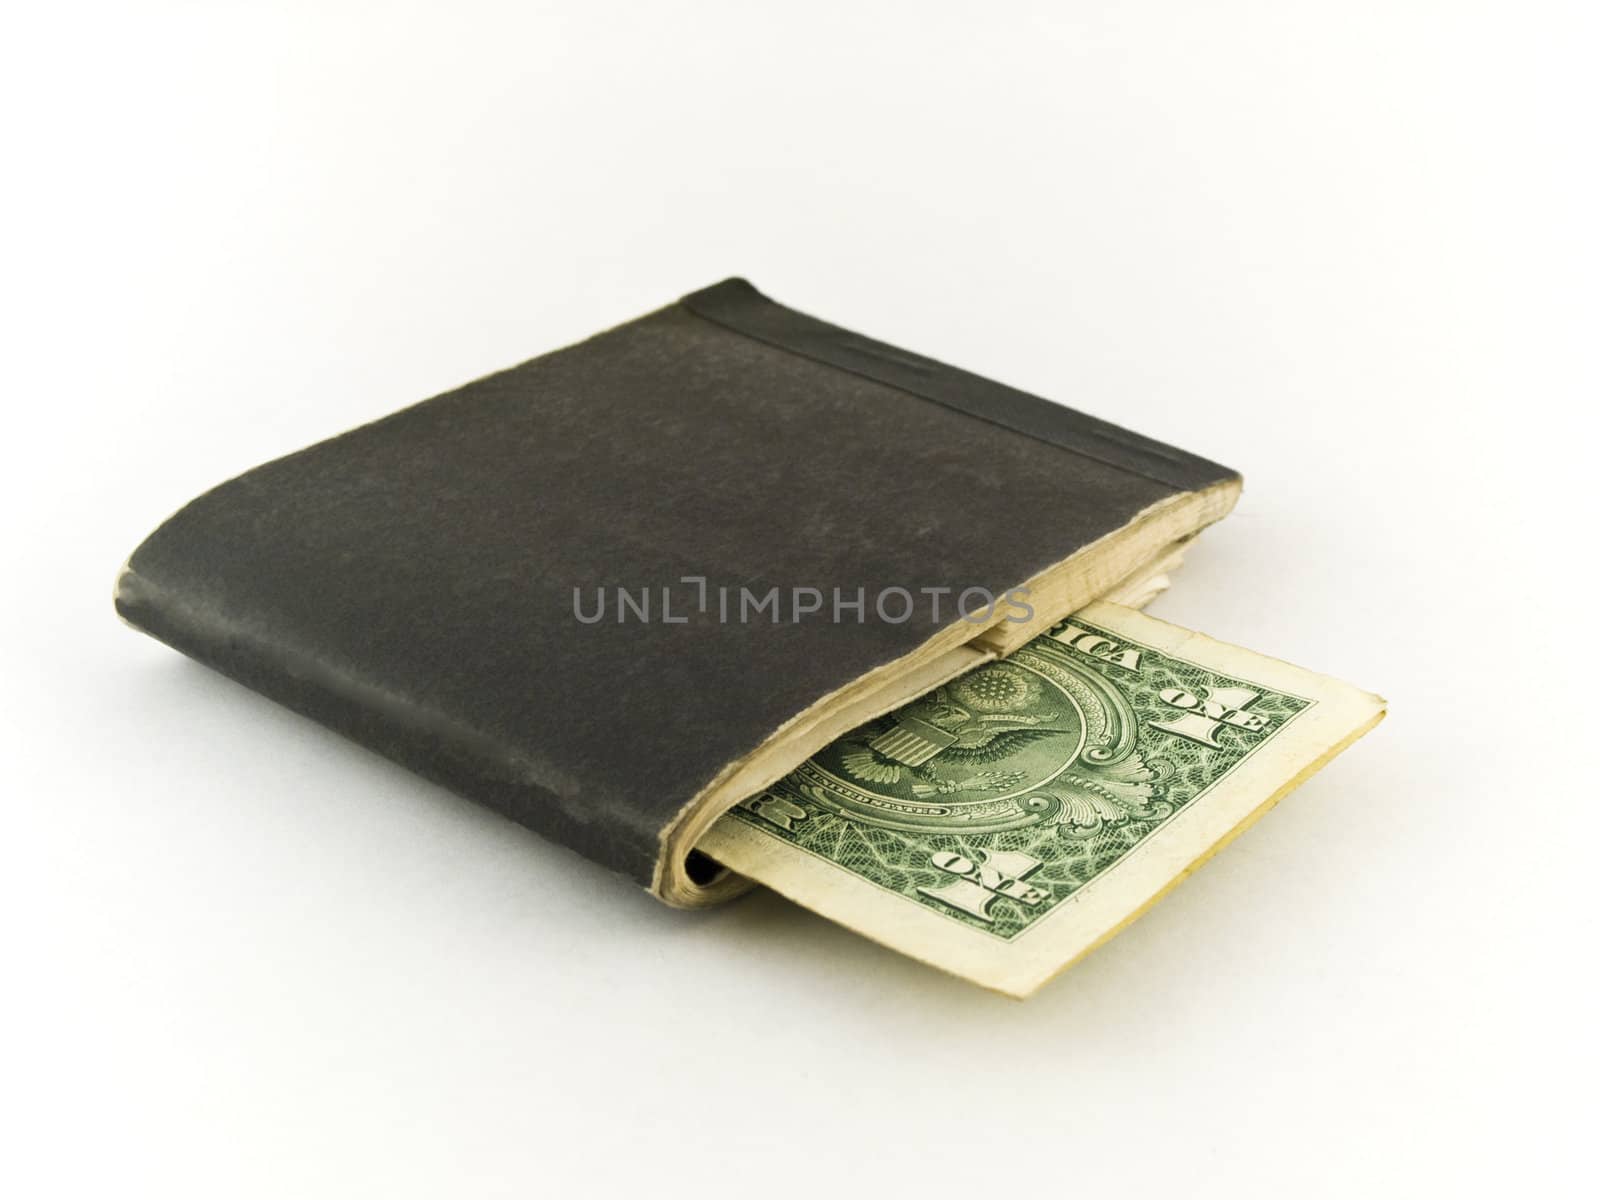 Old Chequebook and One Dollar Bill on White Background